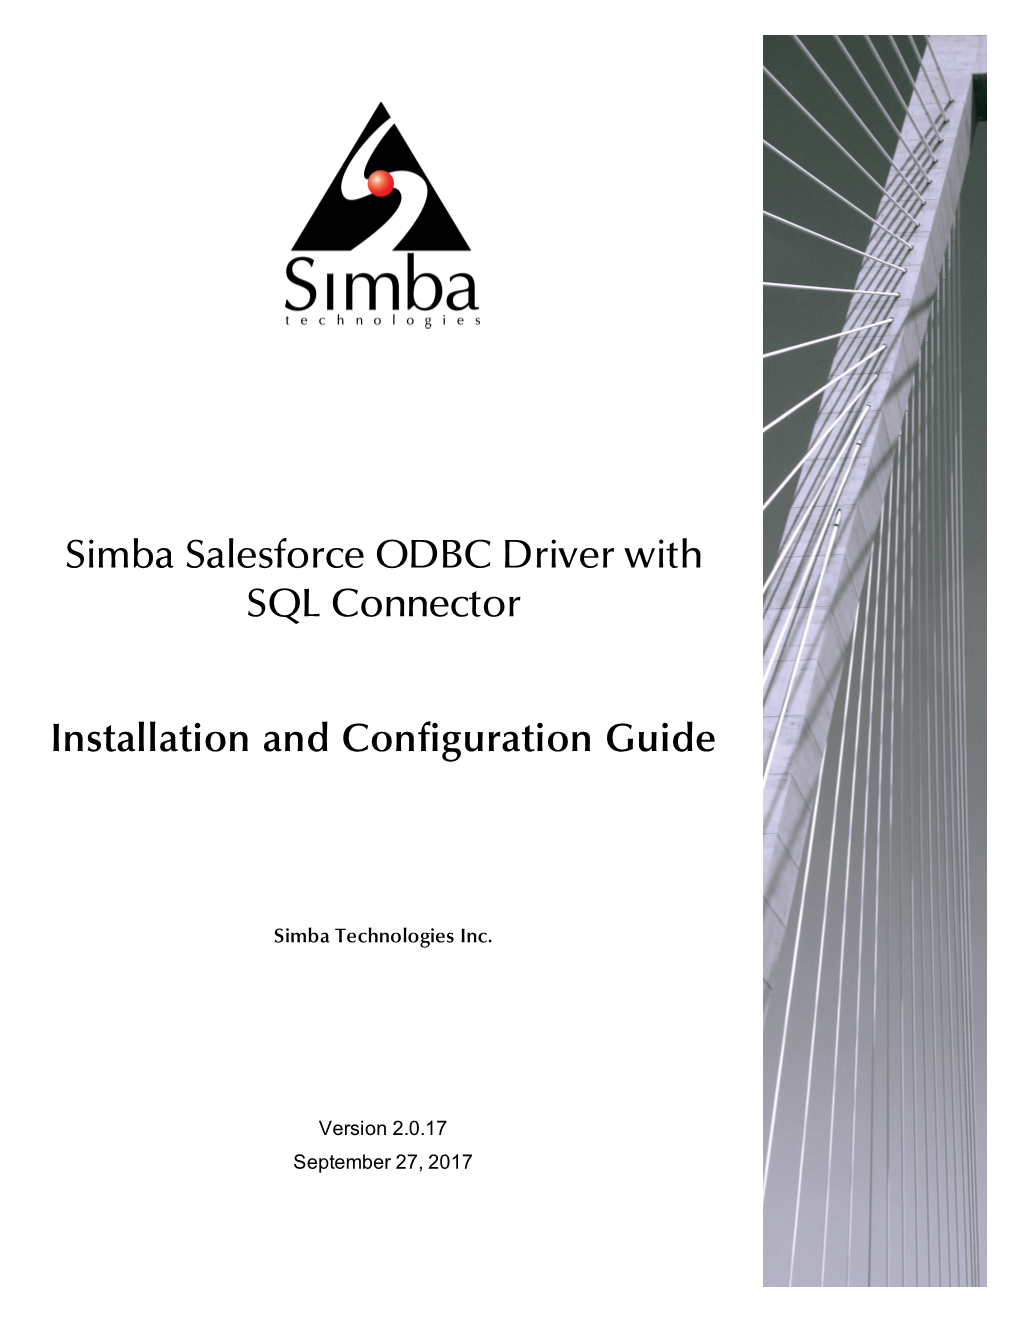 Simba Salesforce ODBC Driver with SQL Connector Installation And